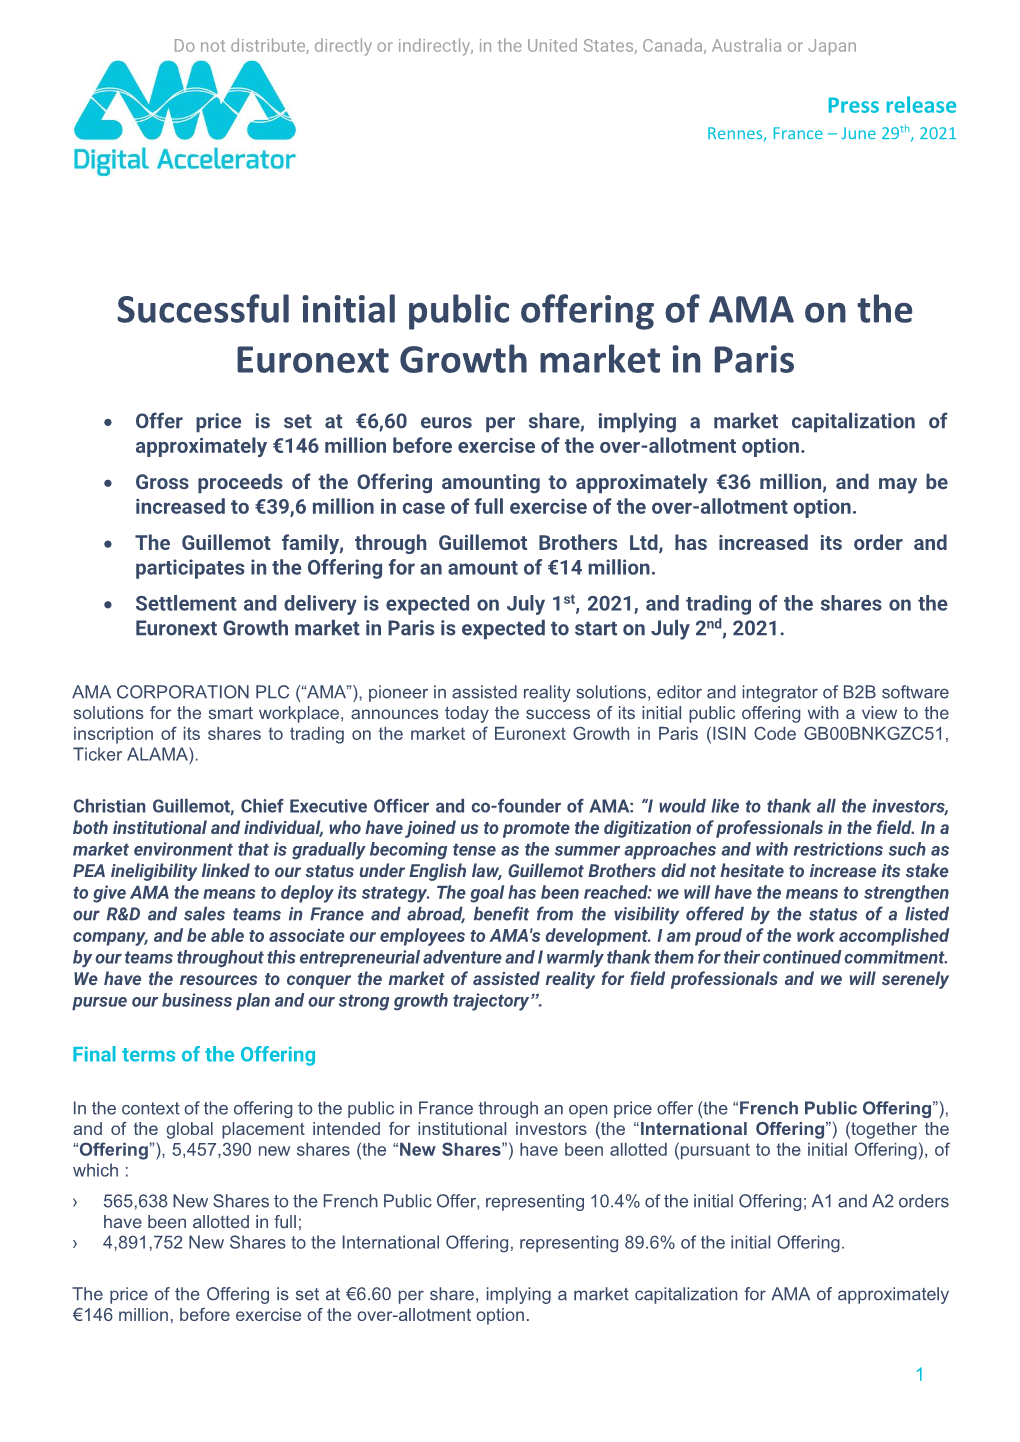 Successful Initial Public Offering of AMA on the Euronext Growth Market in Paris